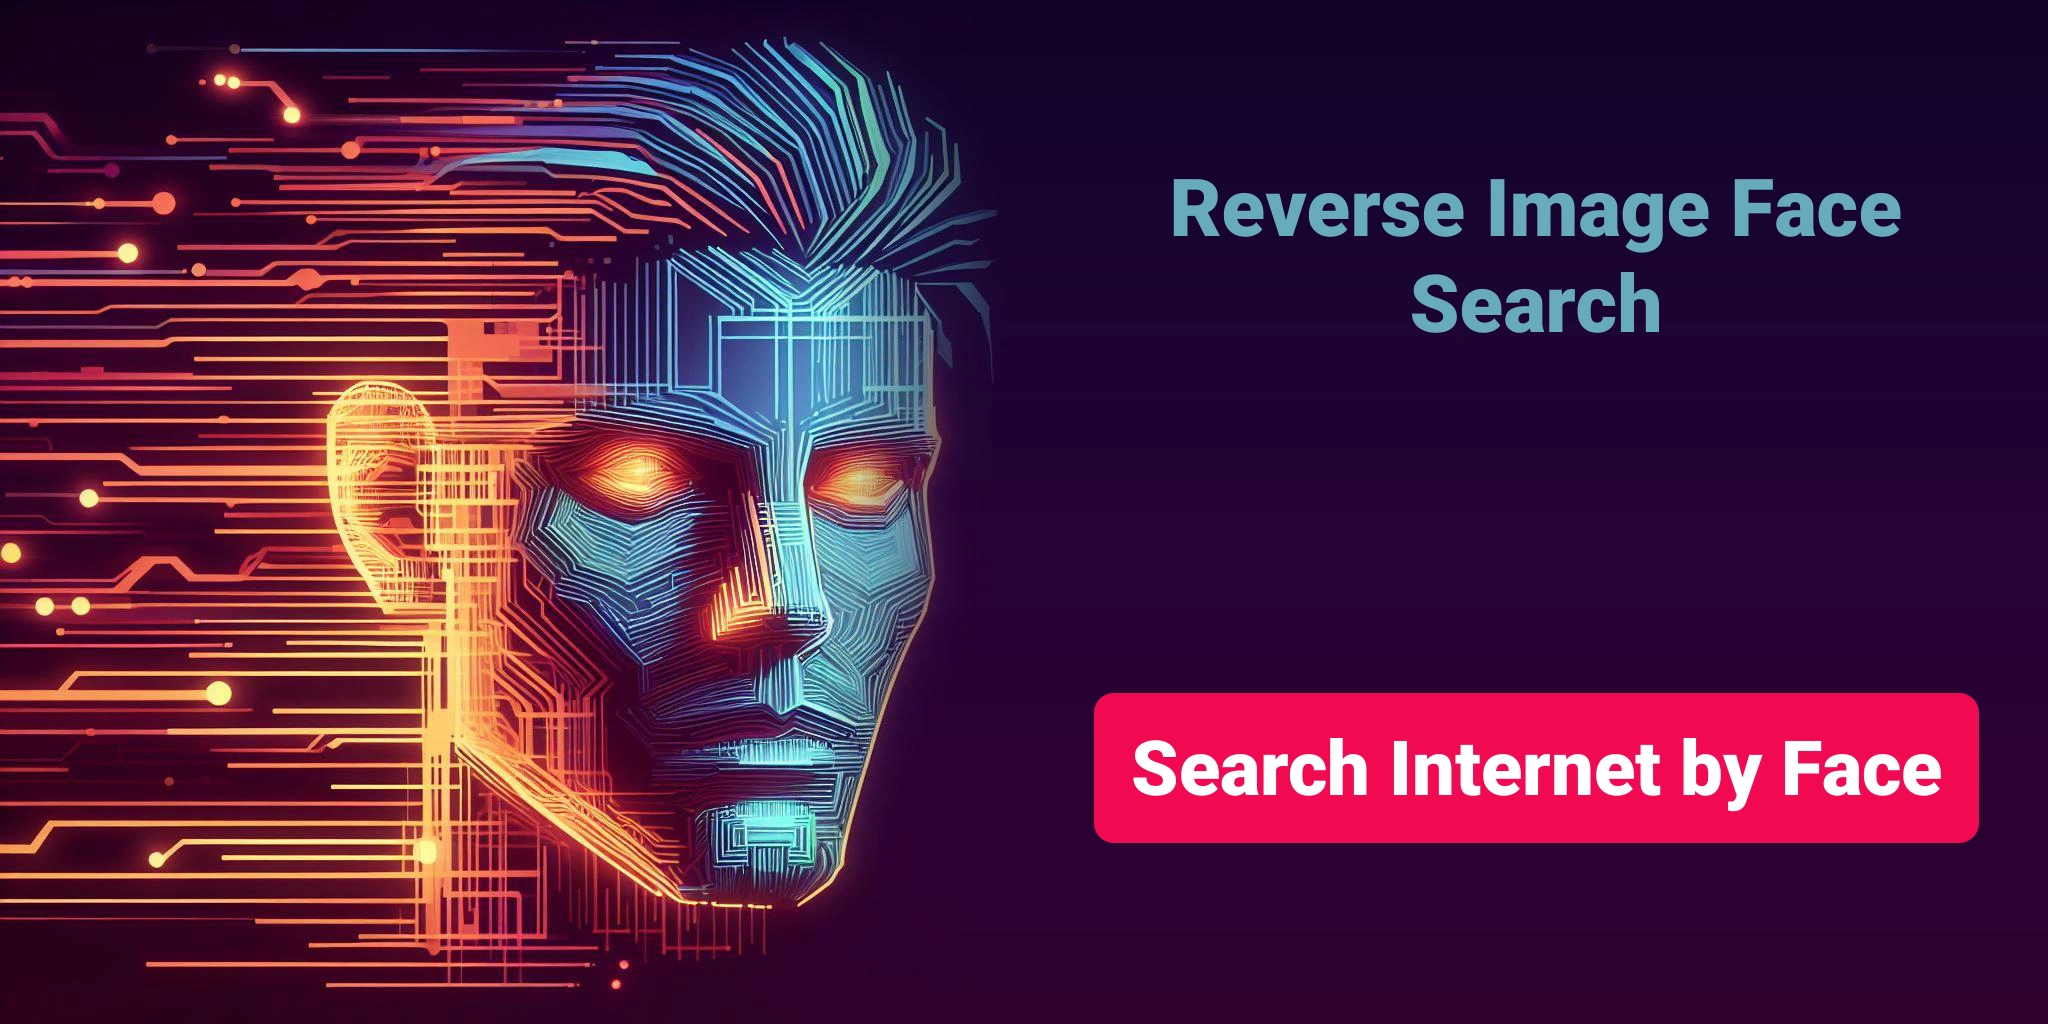 Reverse Image Face Search - Search Internet by Face